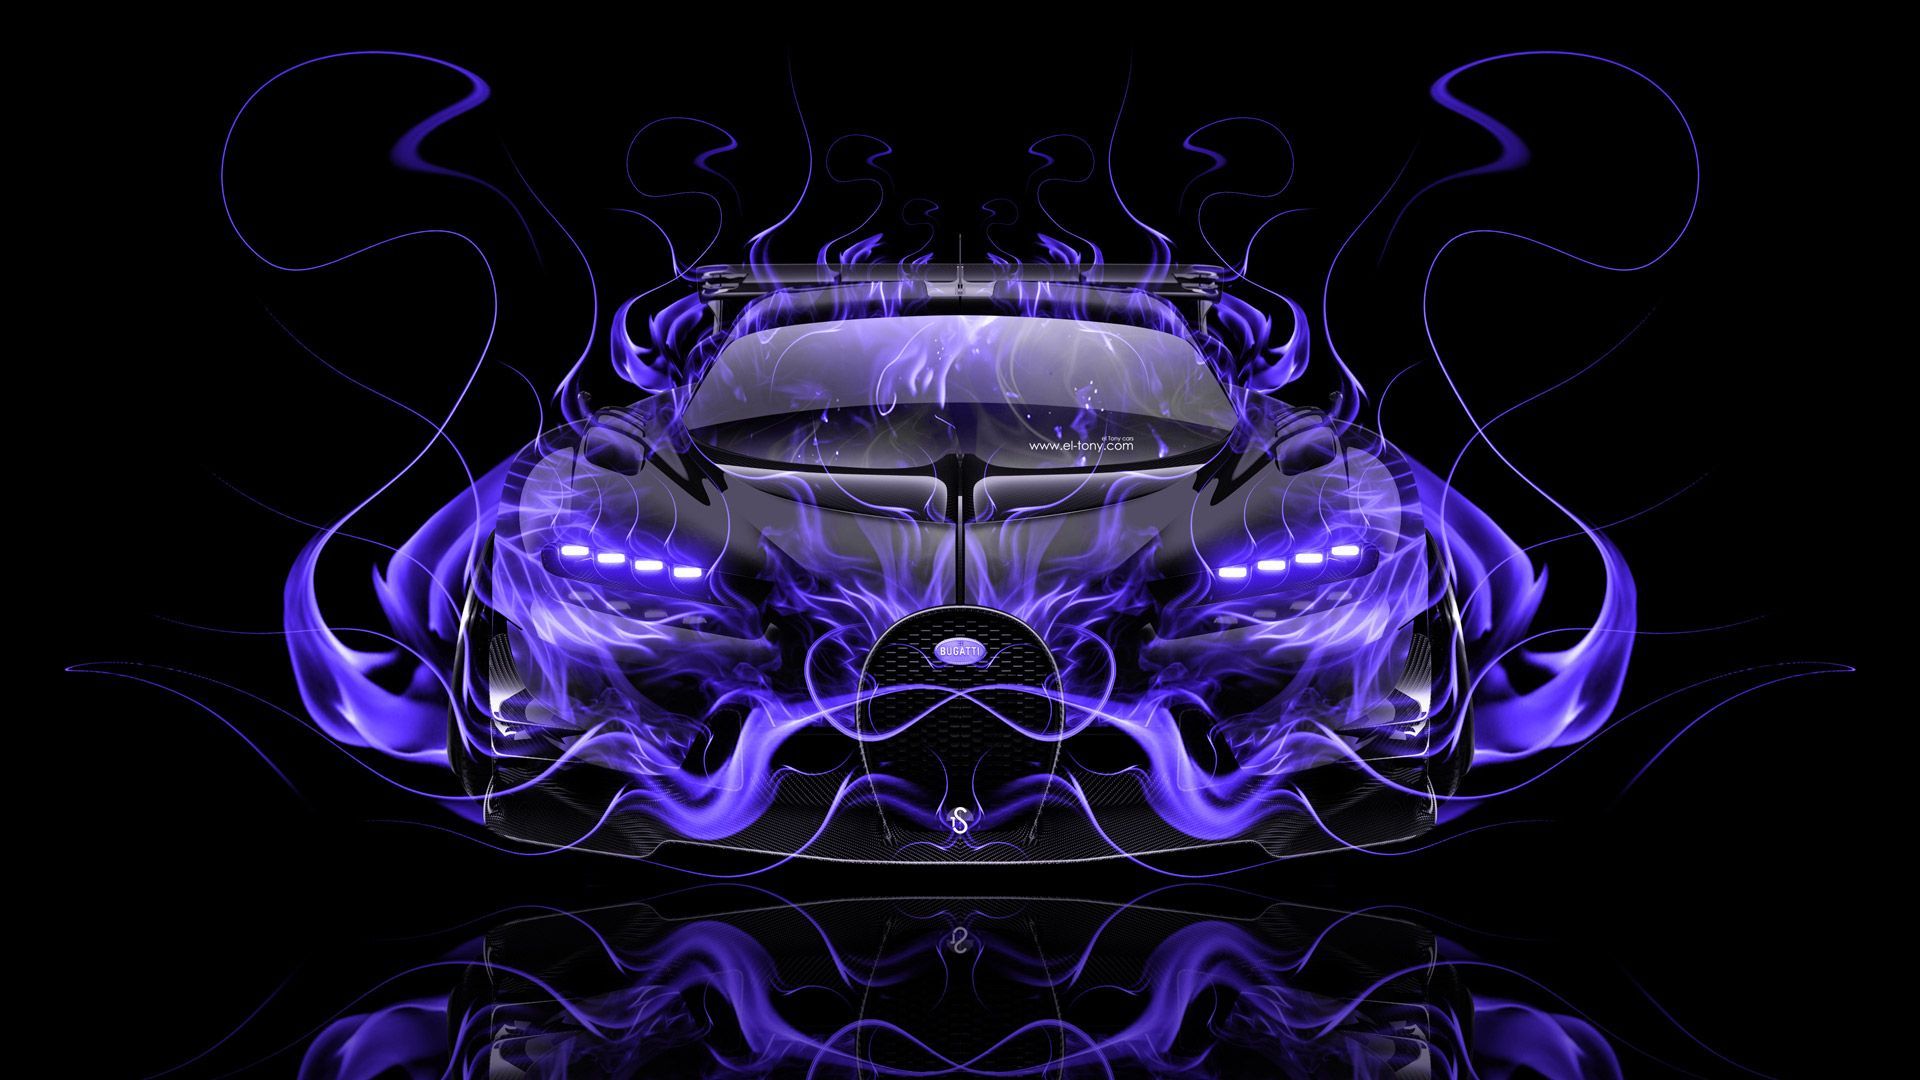 Bugatti Vision Gran Turismo FrontUp Super Fire Flame Abstract Car 2016 Violet Black Colors HD Wallpaper Design By. Car Wallpaper, Car Background, Car Animation